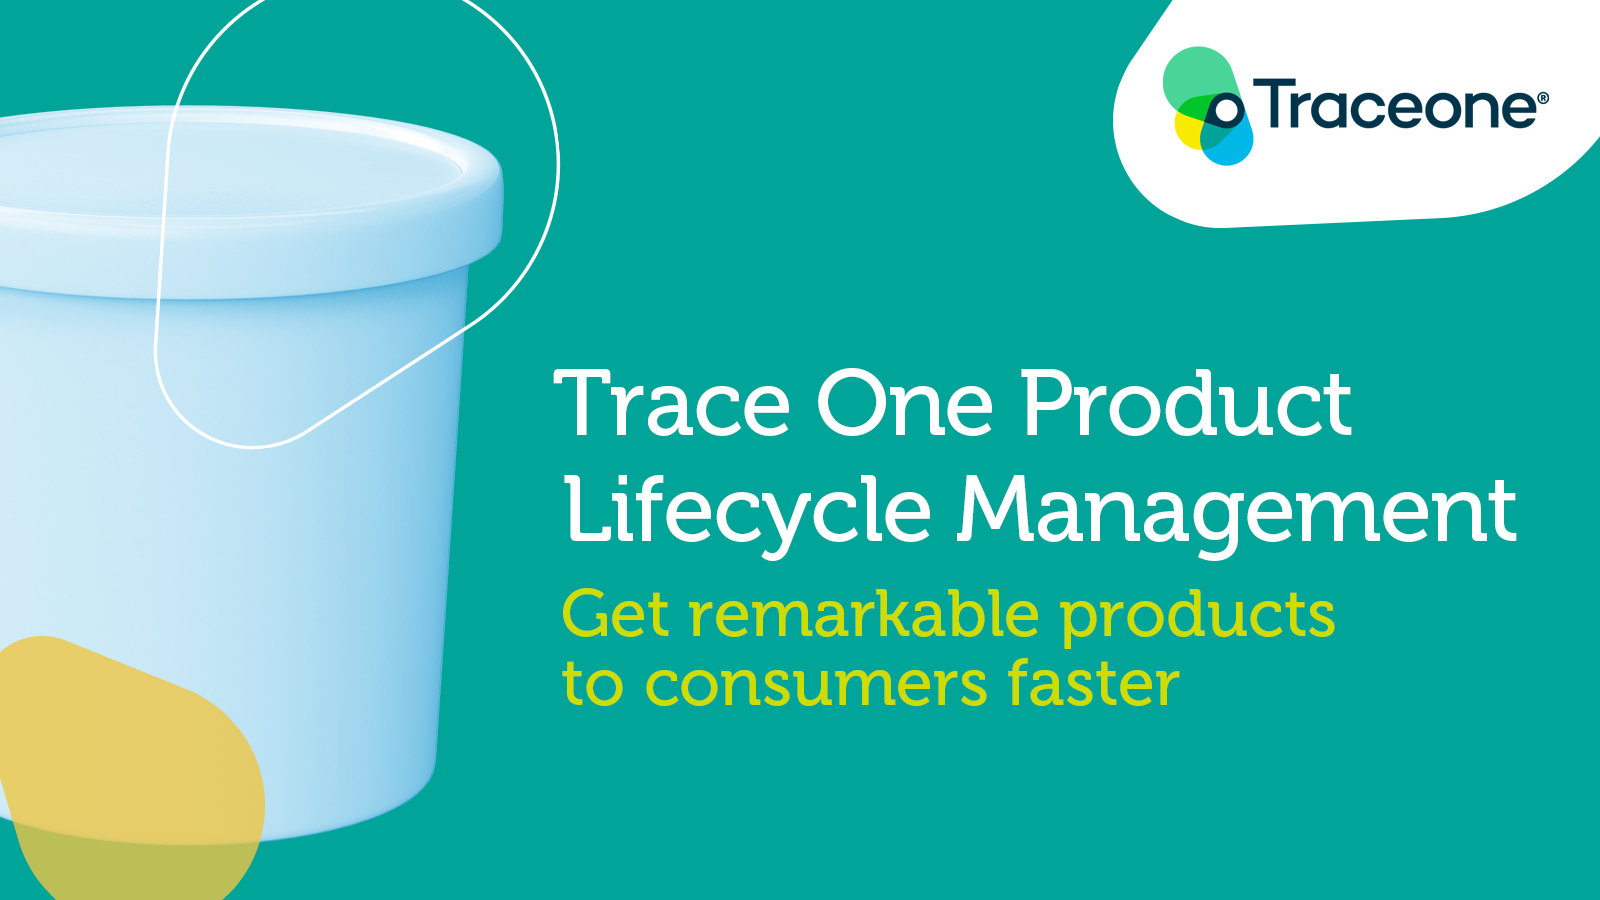 Trace One Product Lifecycle Management Get remarkable products to consumers faster